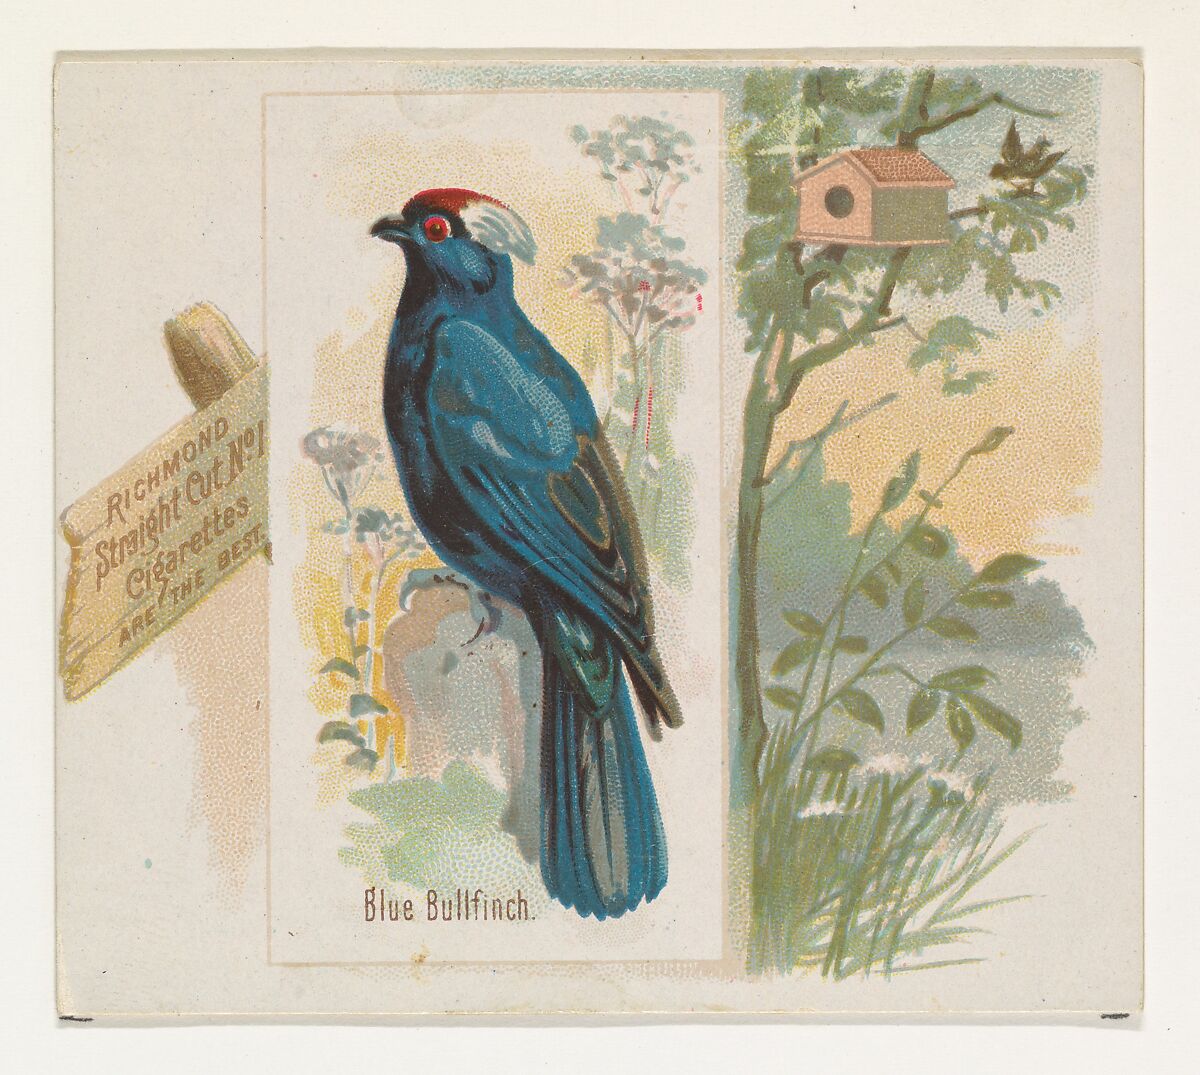 Blue Bullfinch, from the Song Birds of the World series (N42) for Allen & Ginter Cigarettes, Issued by Allen &amp; Ginter (American, Richmond, Virginia), Commercial color lithograph 